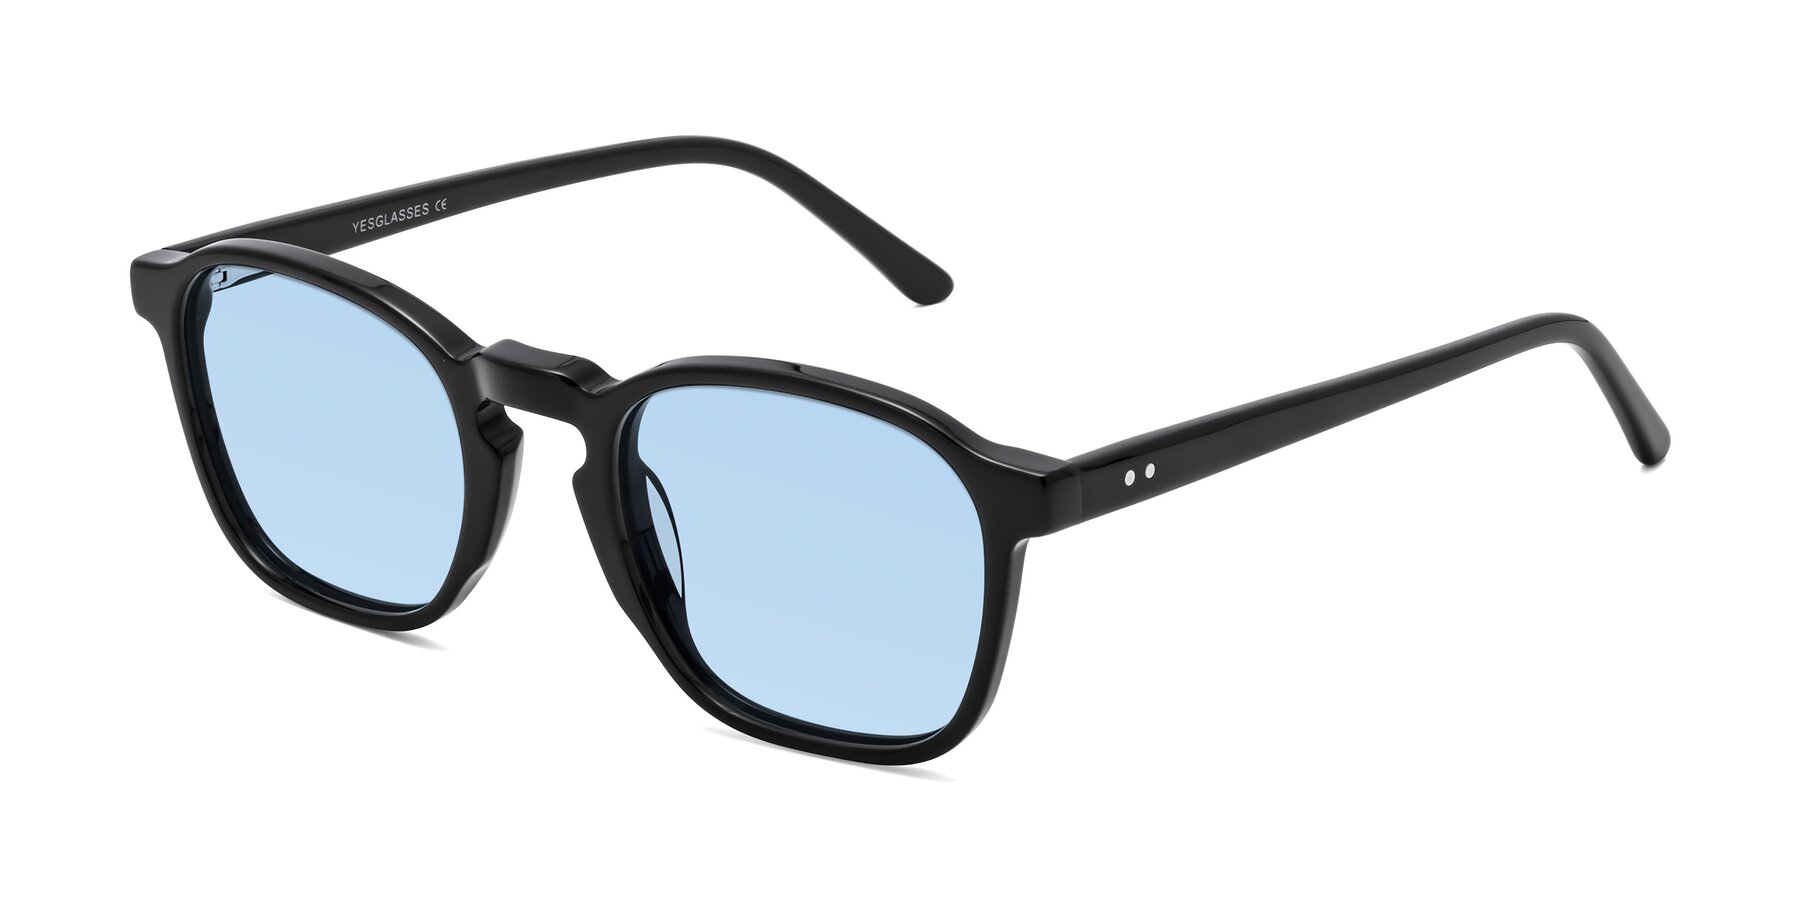 Angle of Generous in Black with Light Blue Tinted Lenses